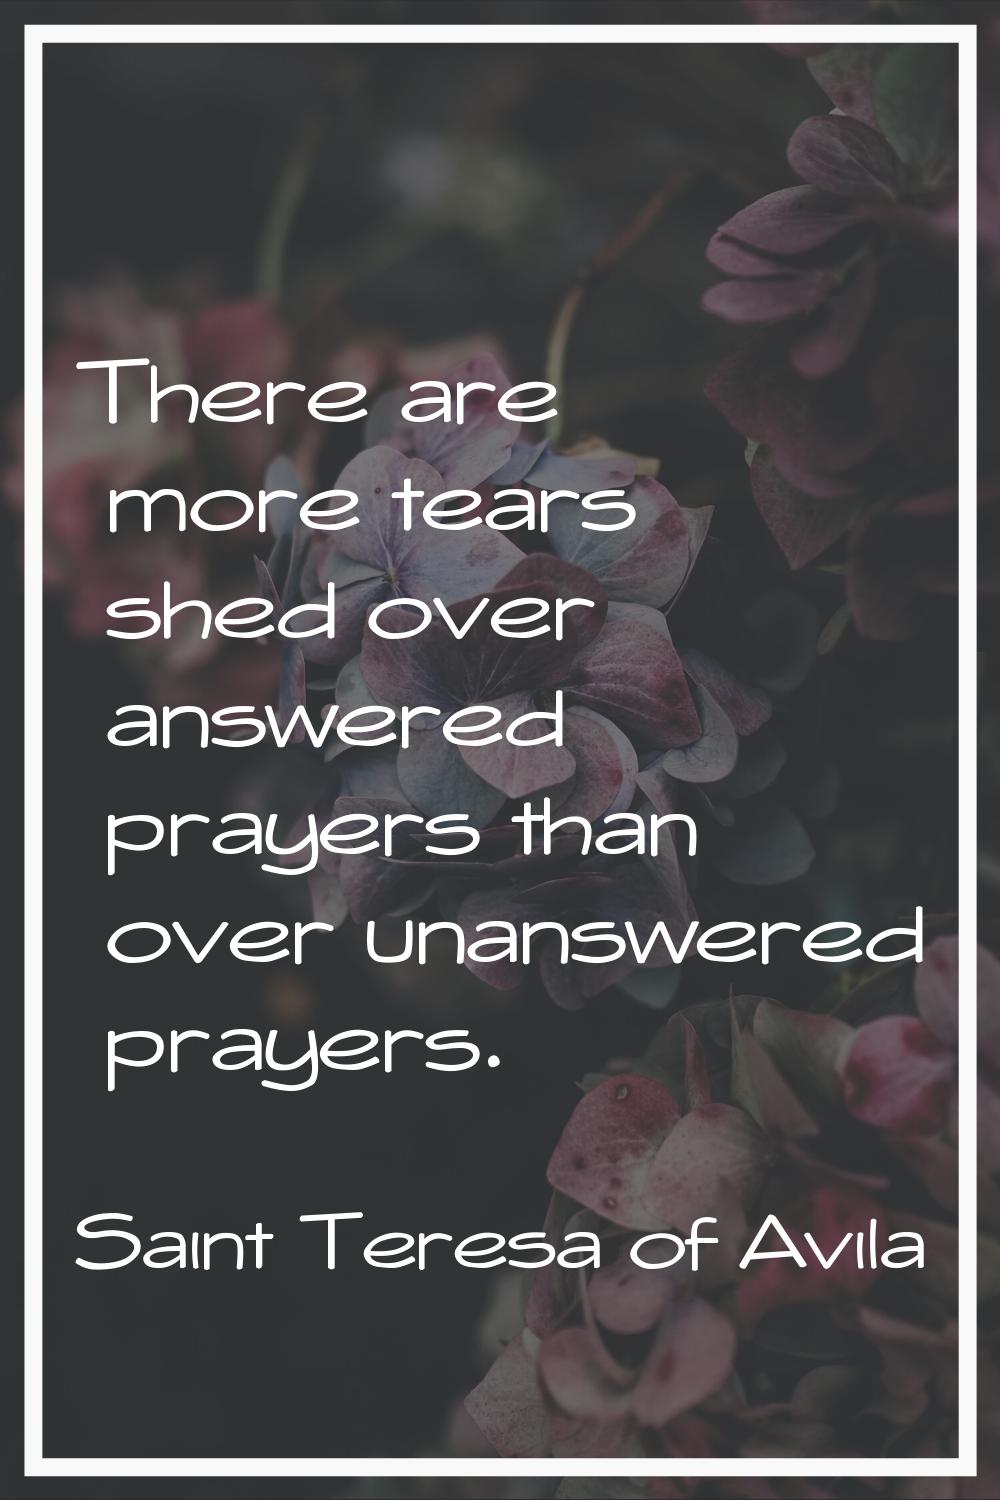 There are more tears shed over answered prayers than over unanswered prayers.